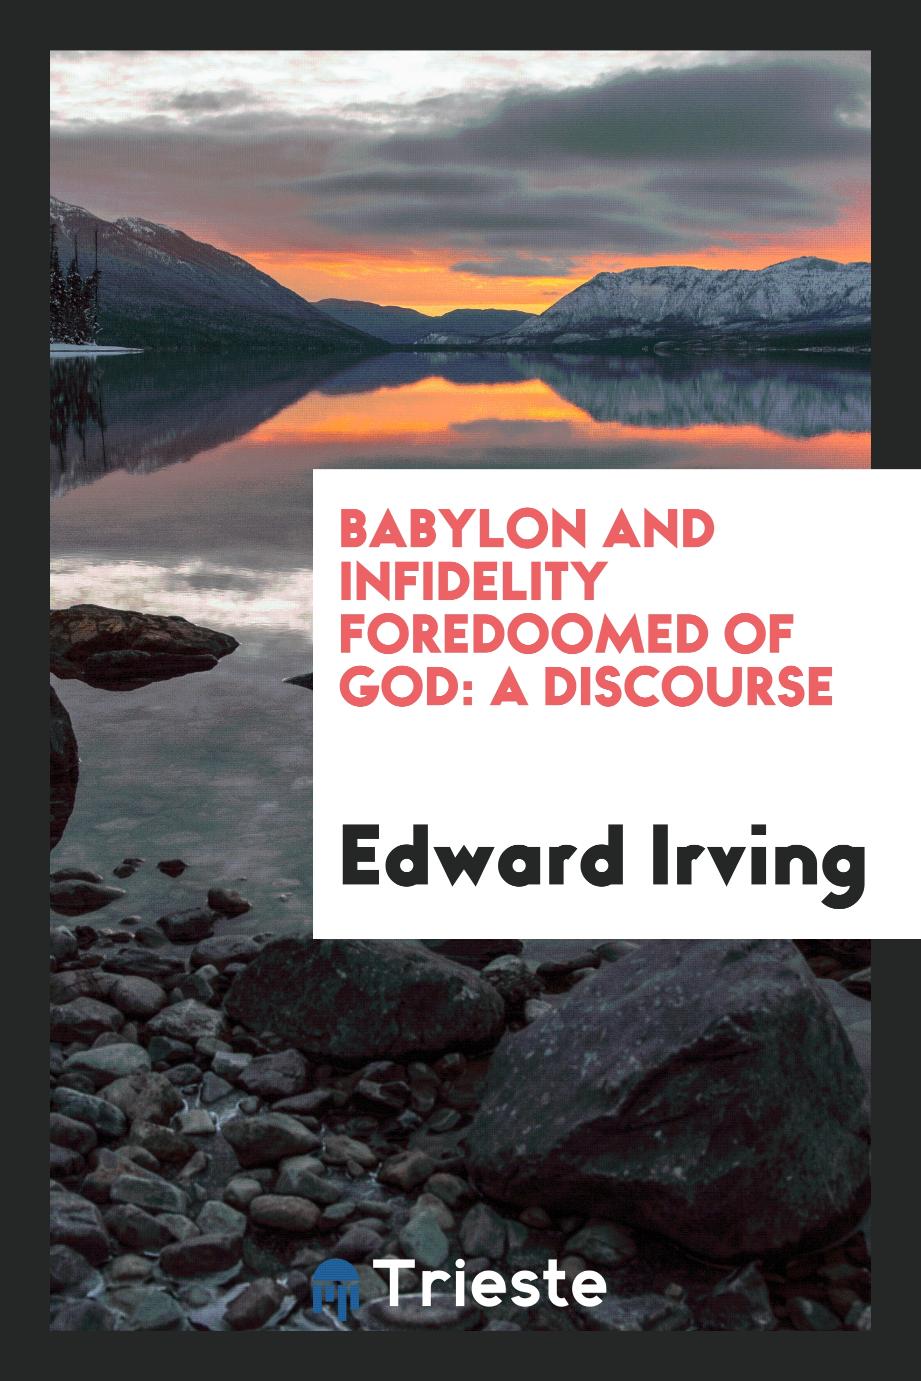 Babylon and Infidelity Foredoomed of God: A Discourse